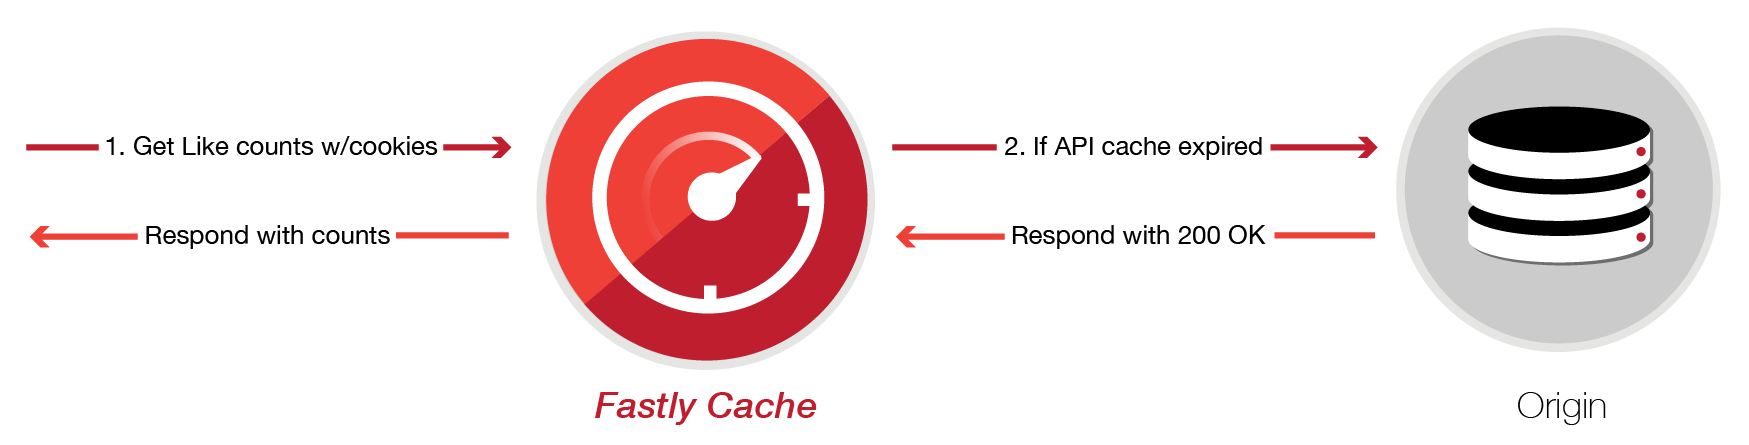 Fastly Cache 2